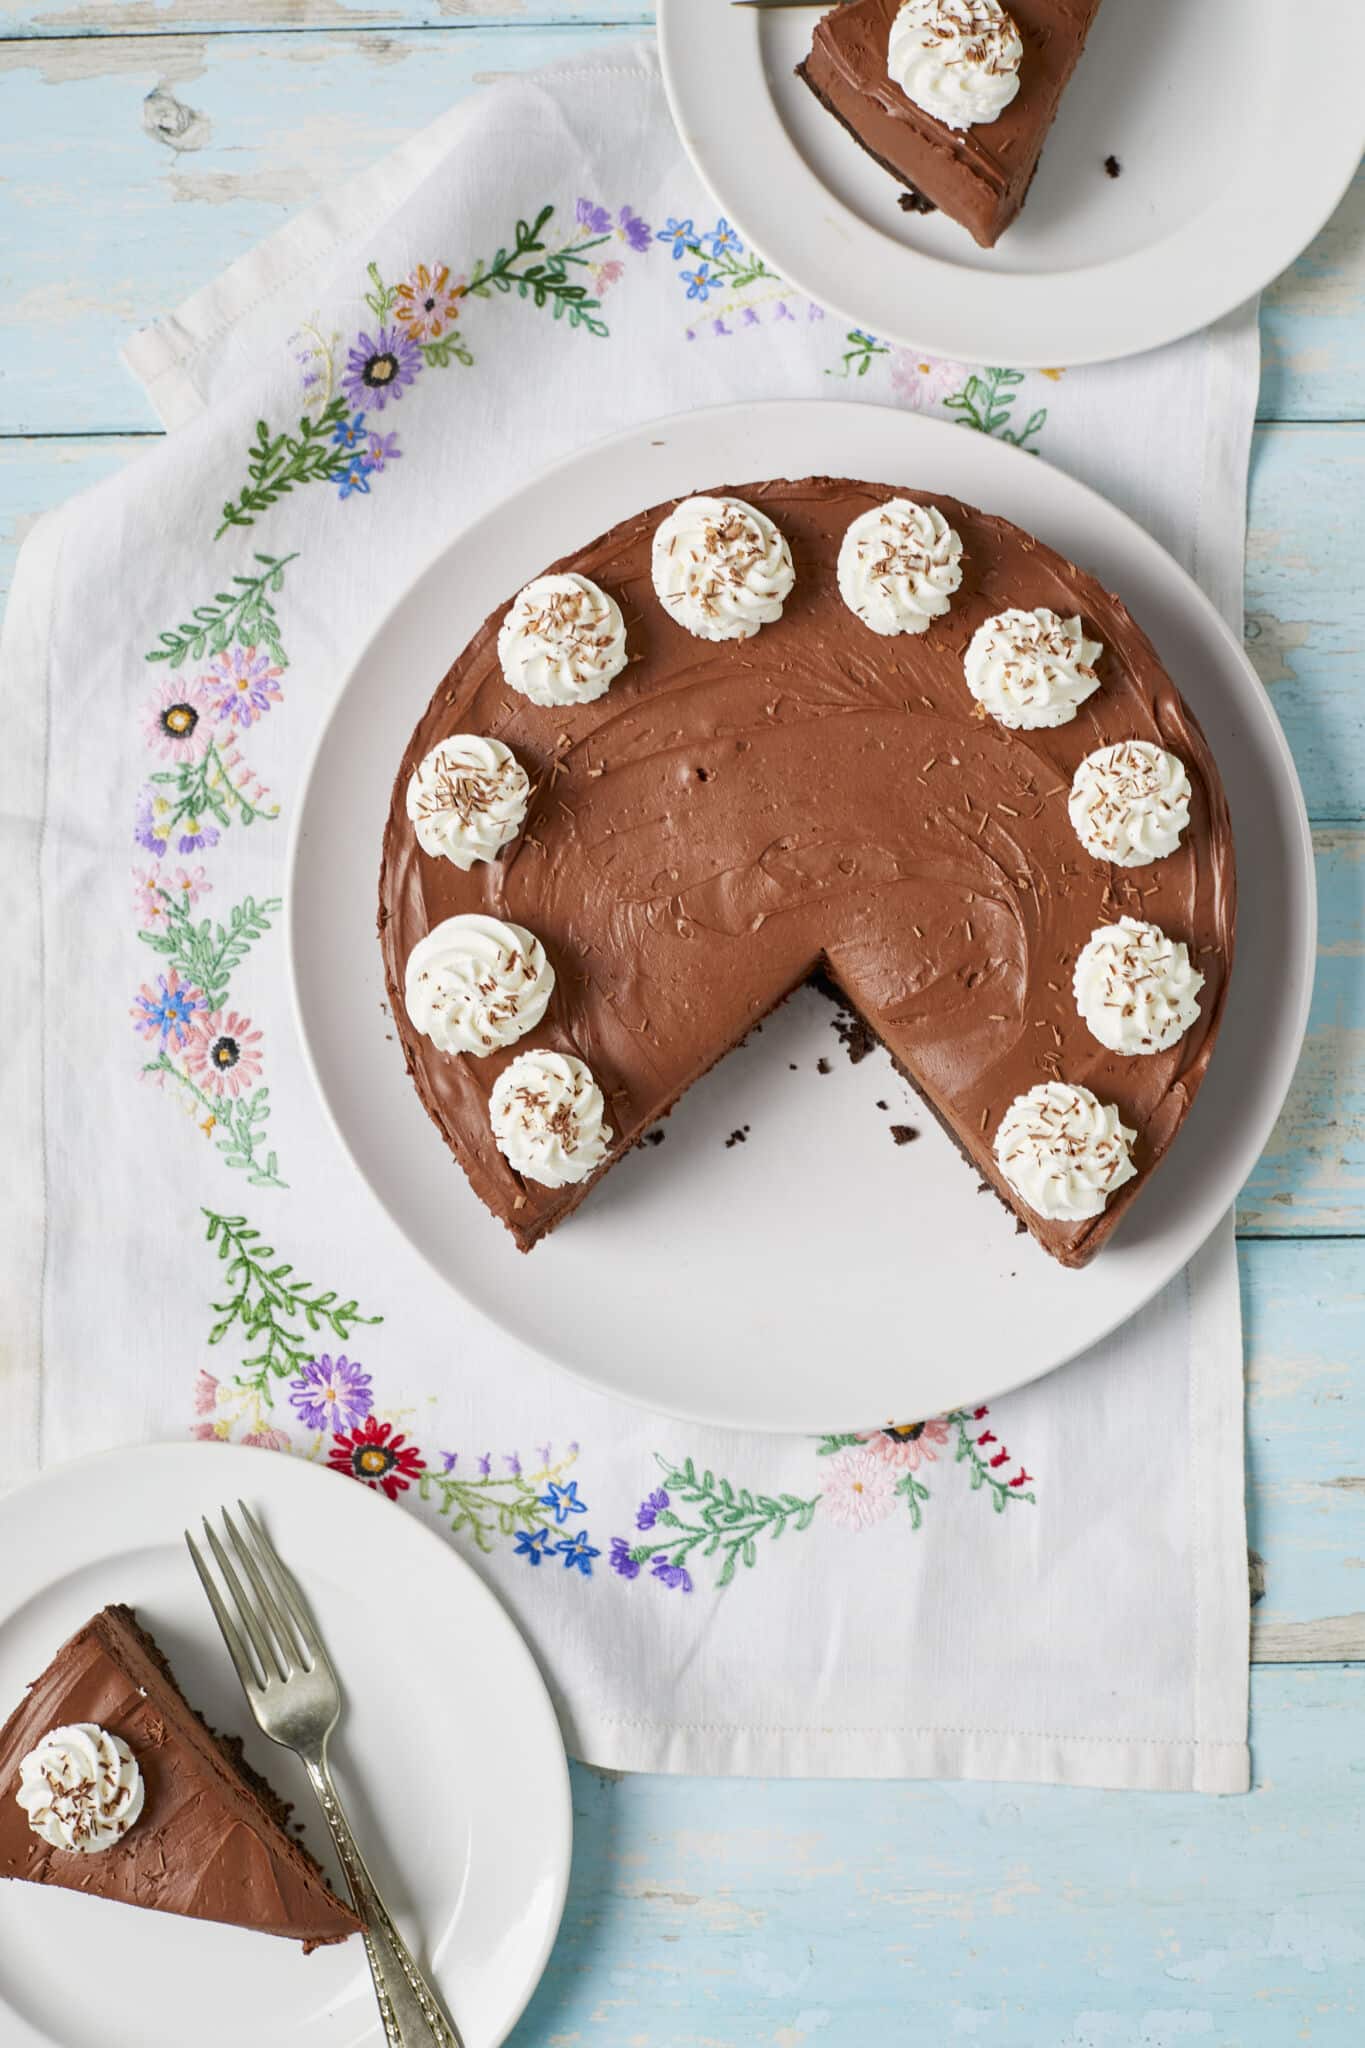 A quarter of the whole no-bake chocolate cheesecake was cut into 2 slices and served on two dessert plates with forks. Each slice has a whipped cream rosette with shaved chocolate. 